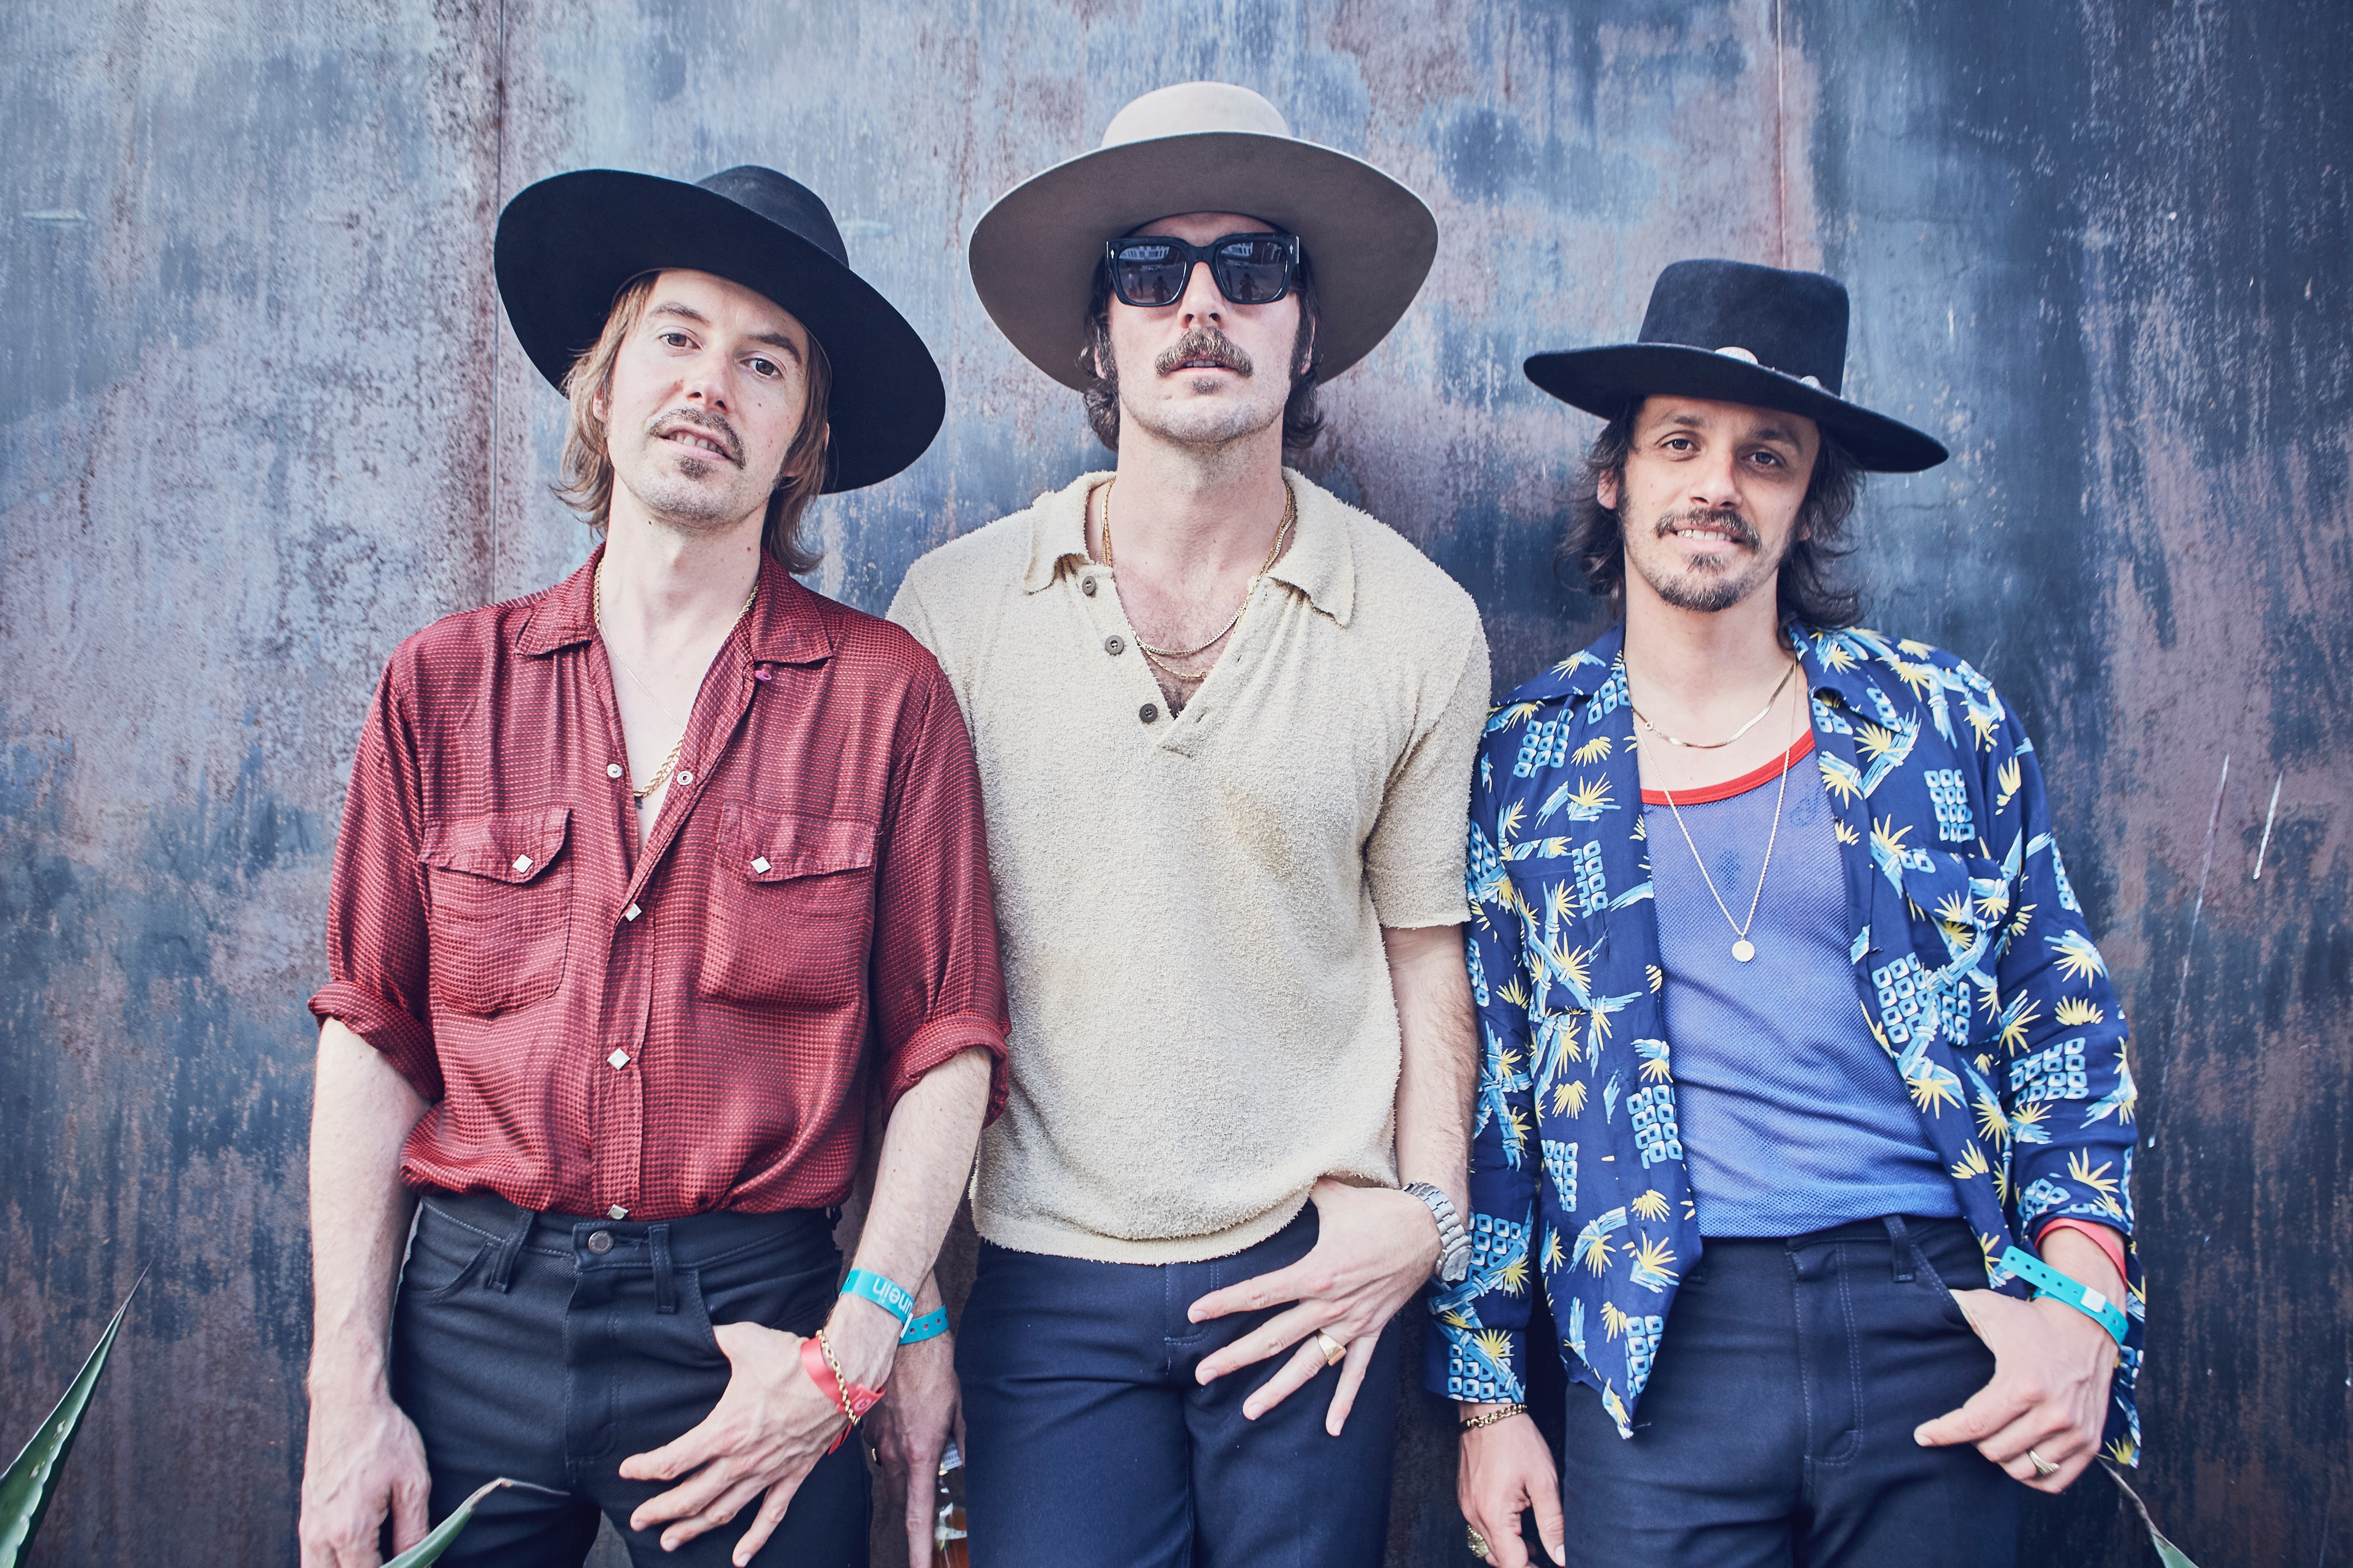 Midland Take Over 2017 South by Southwest (SXSW) Festival in Austin